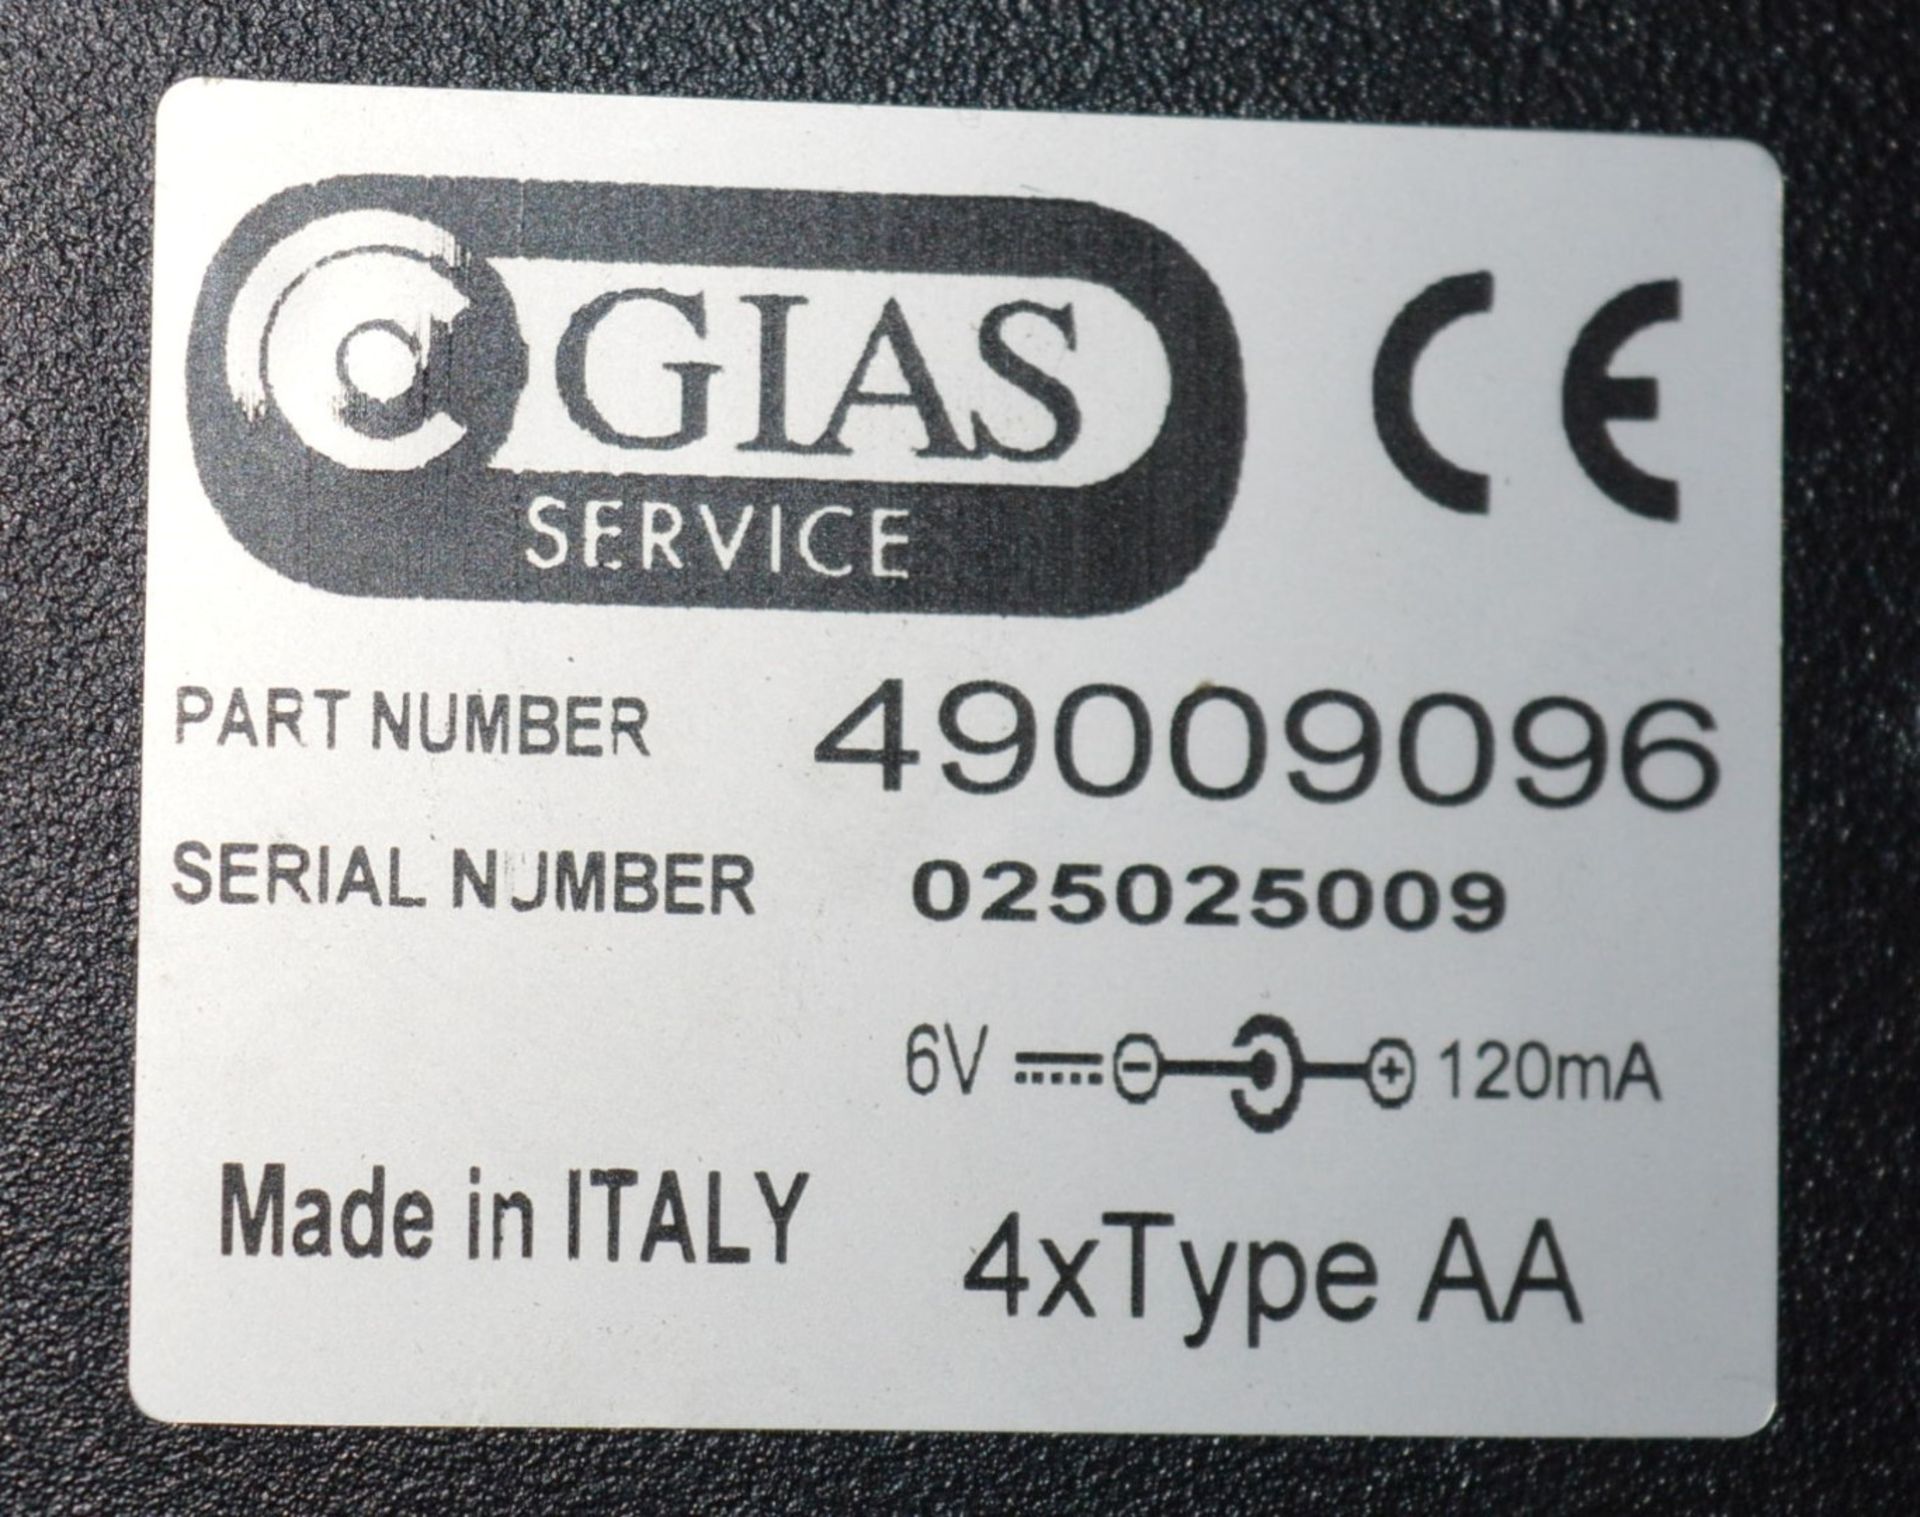 1 x Gias Candy Module EEPROM Manager - Model 49009096 - Boxed With Accessories - Working Order - - Image 3 of 3